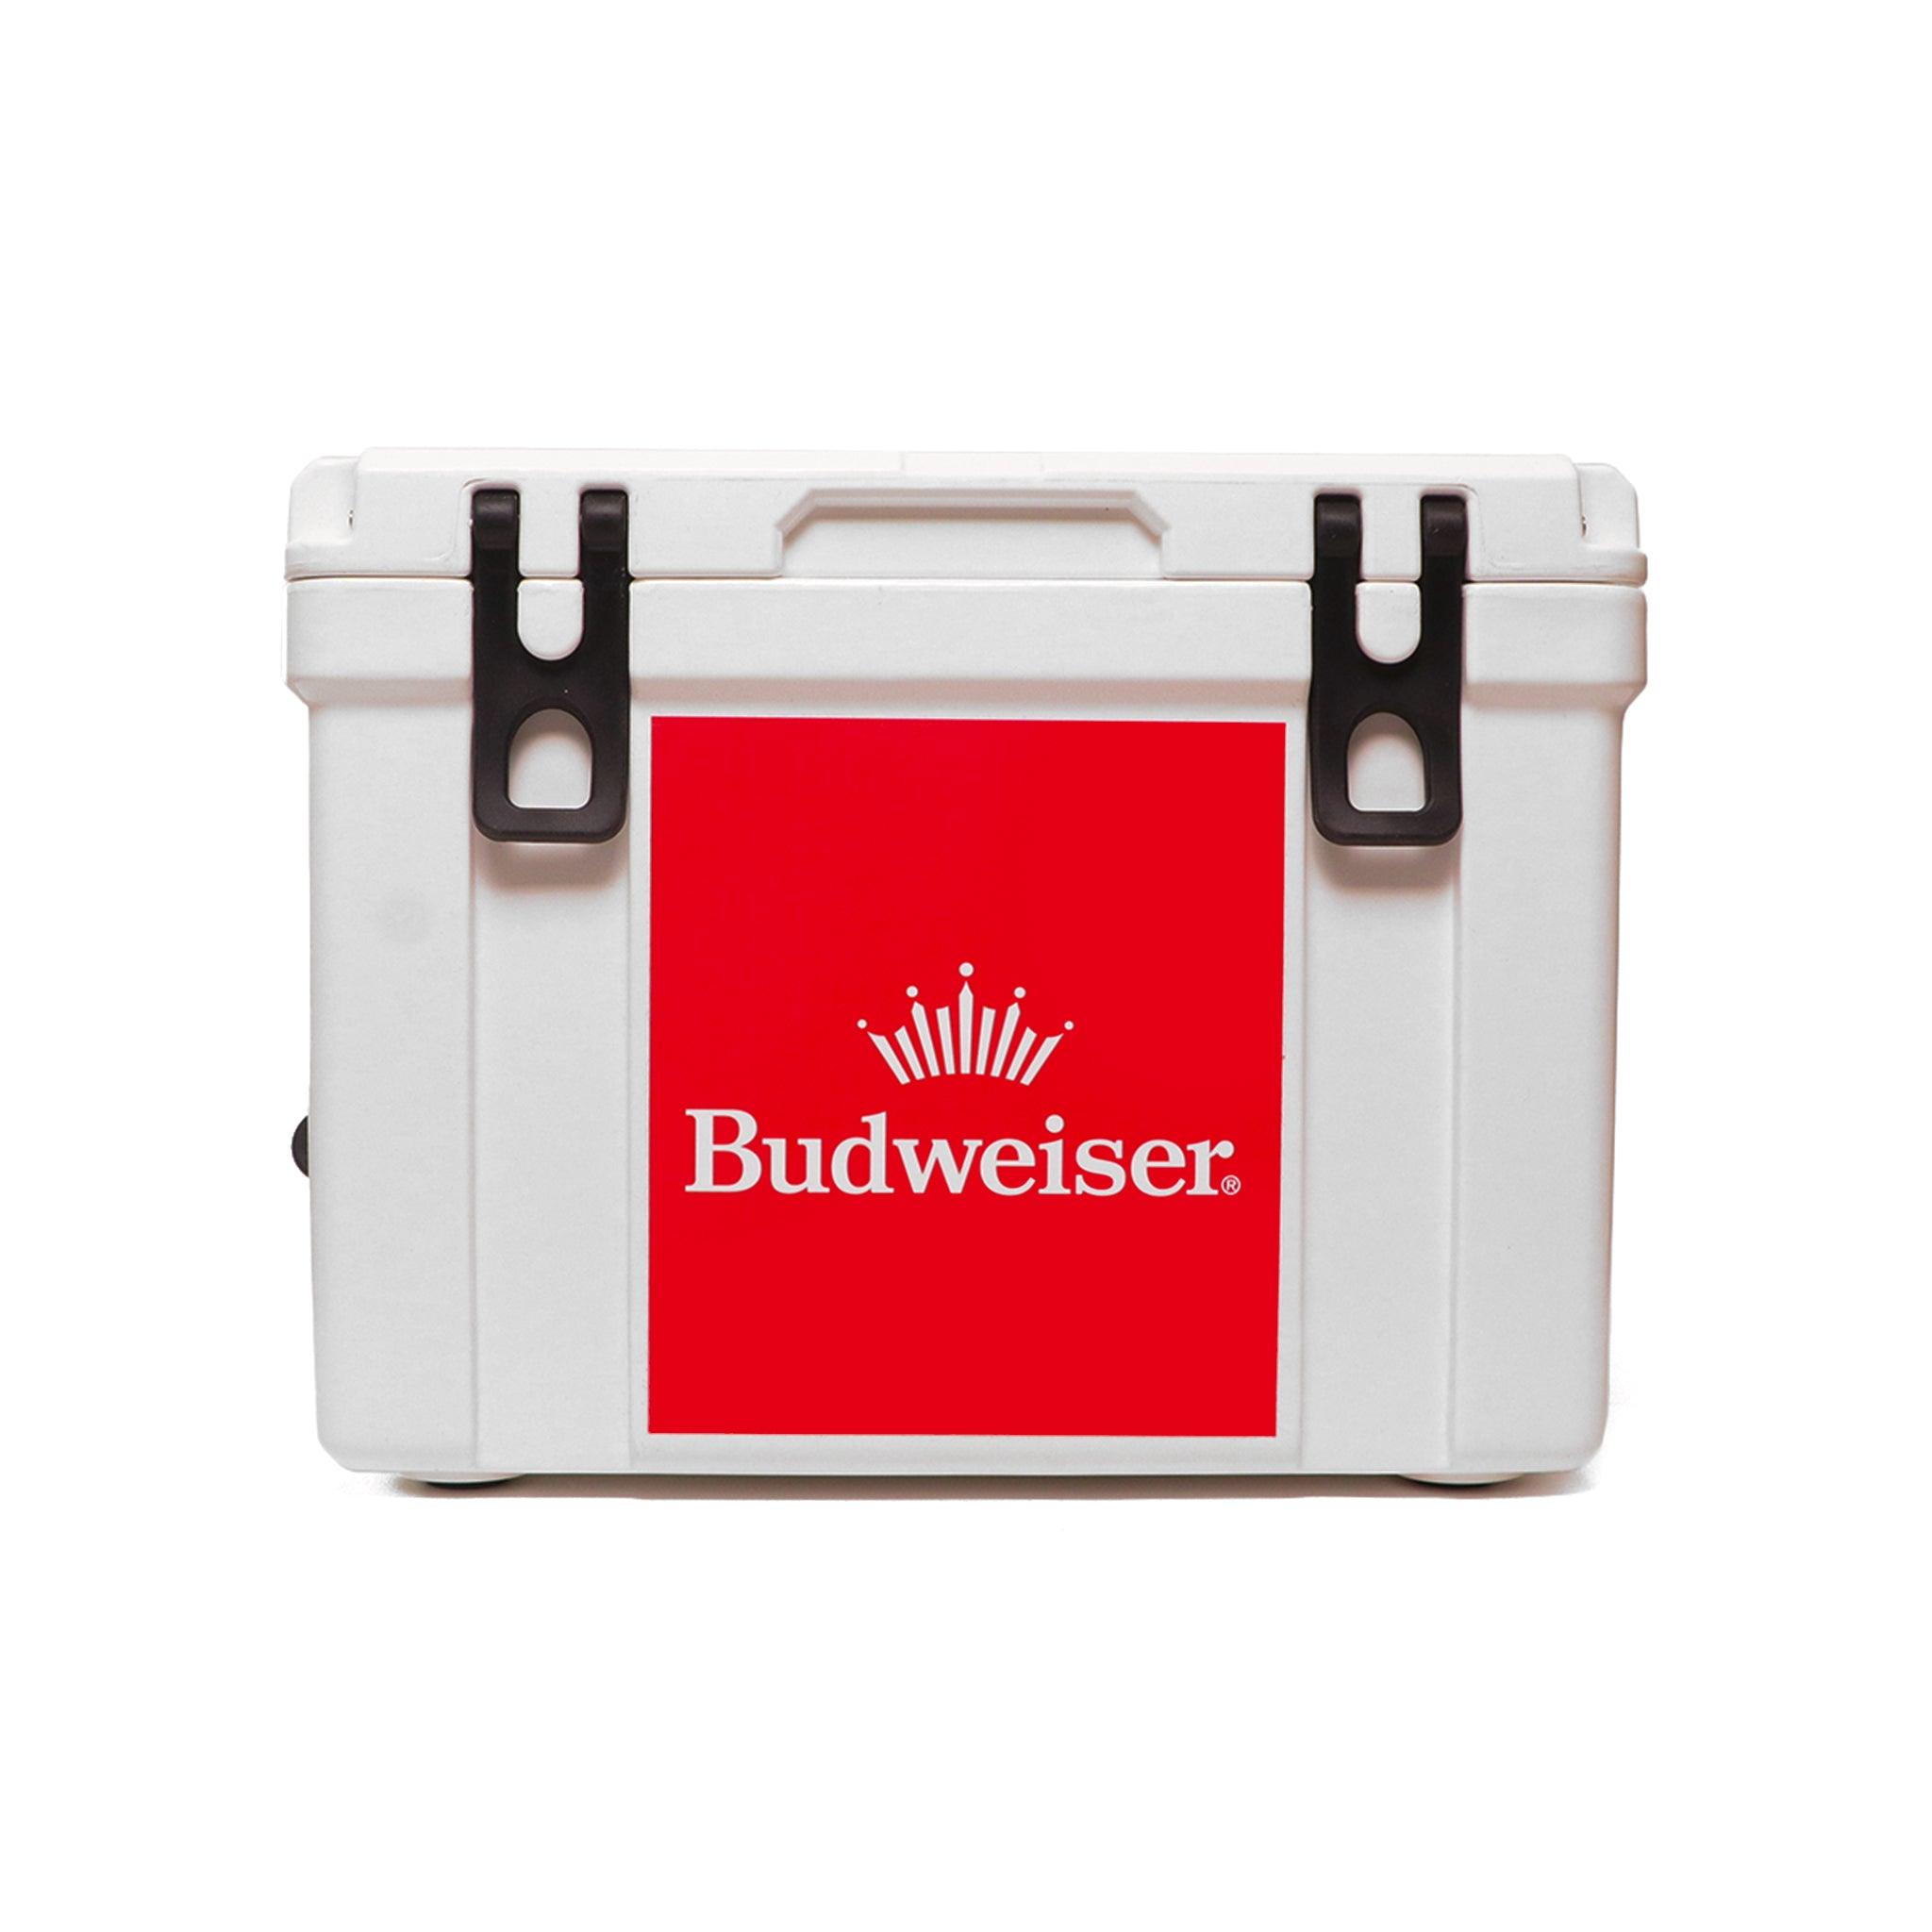 Budweiser cooler with decal decoration Budweiser with crown